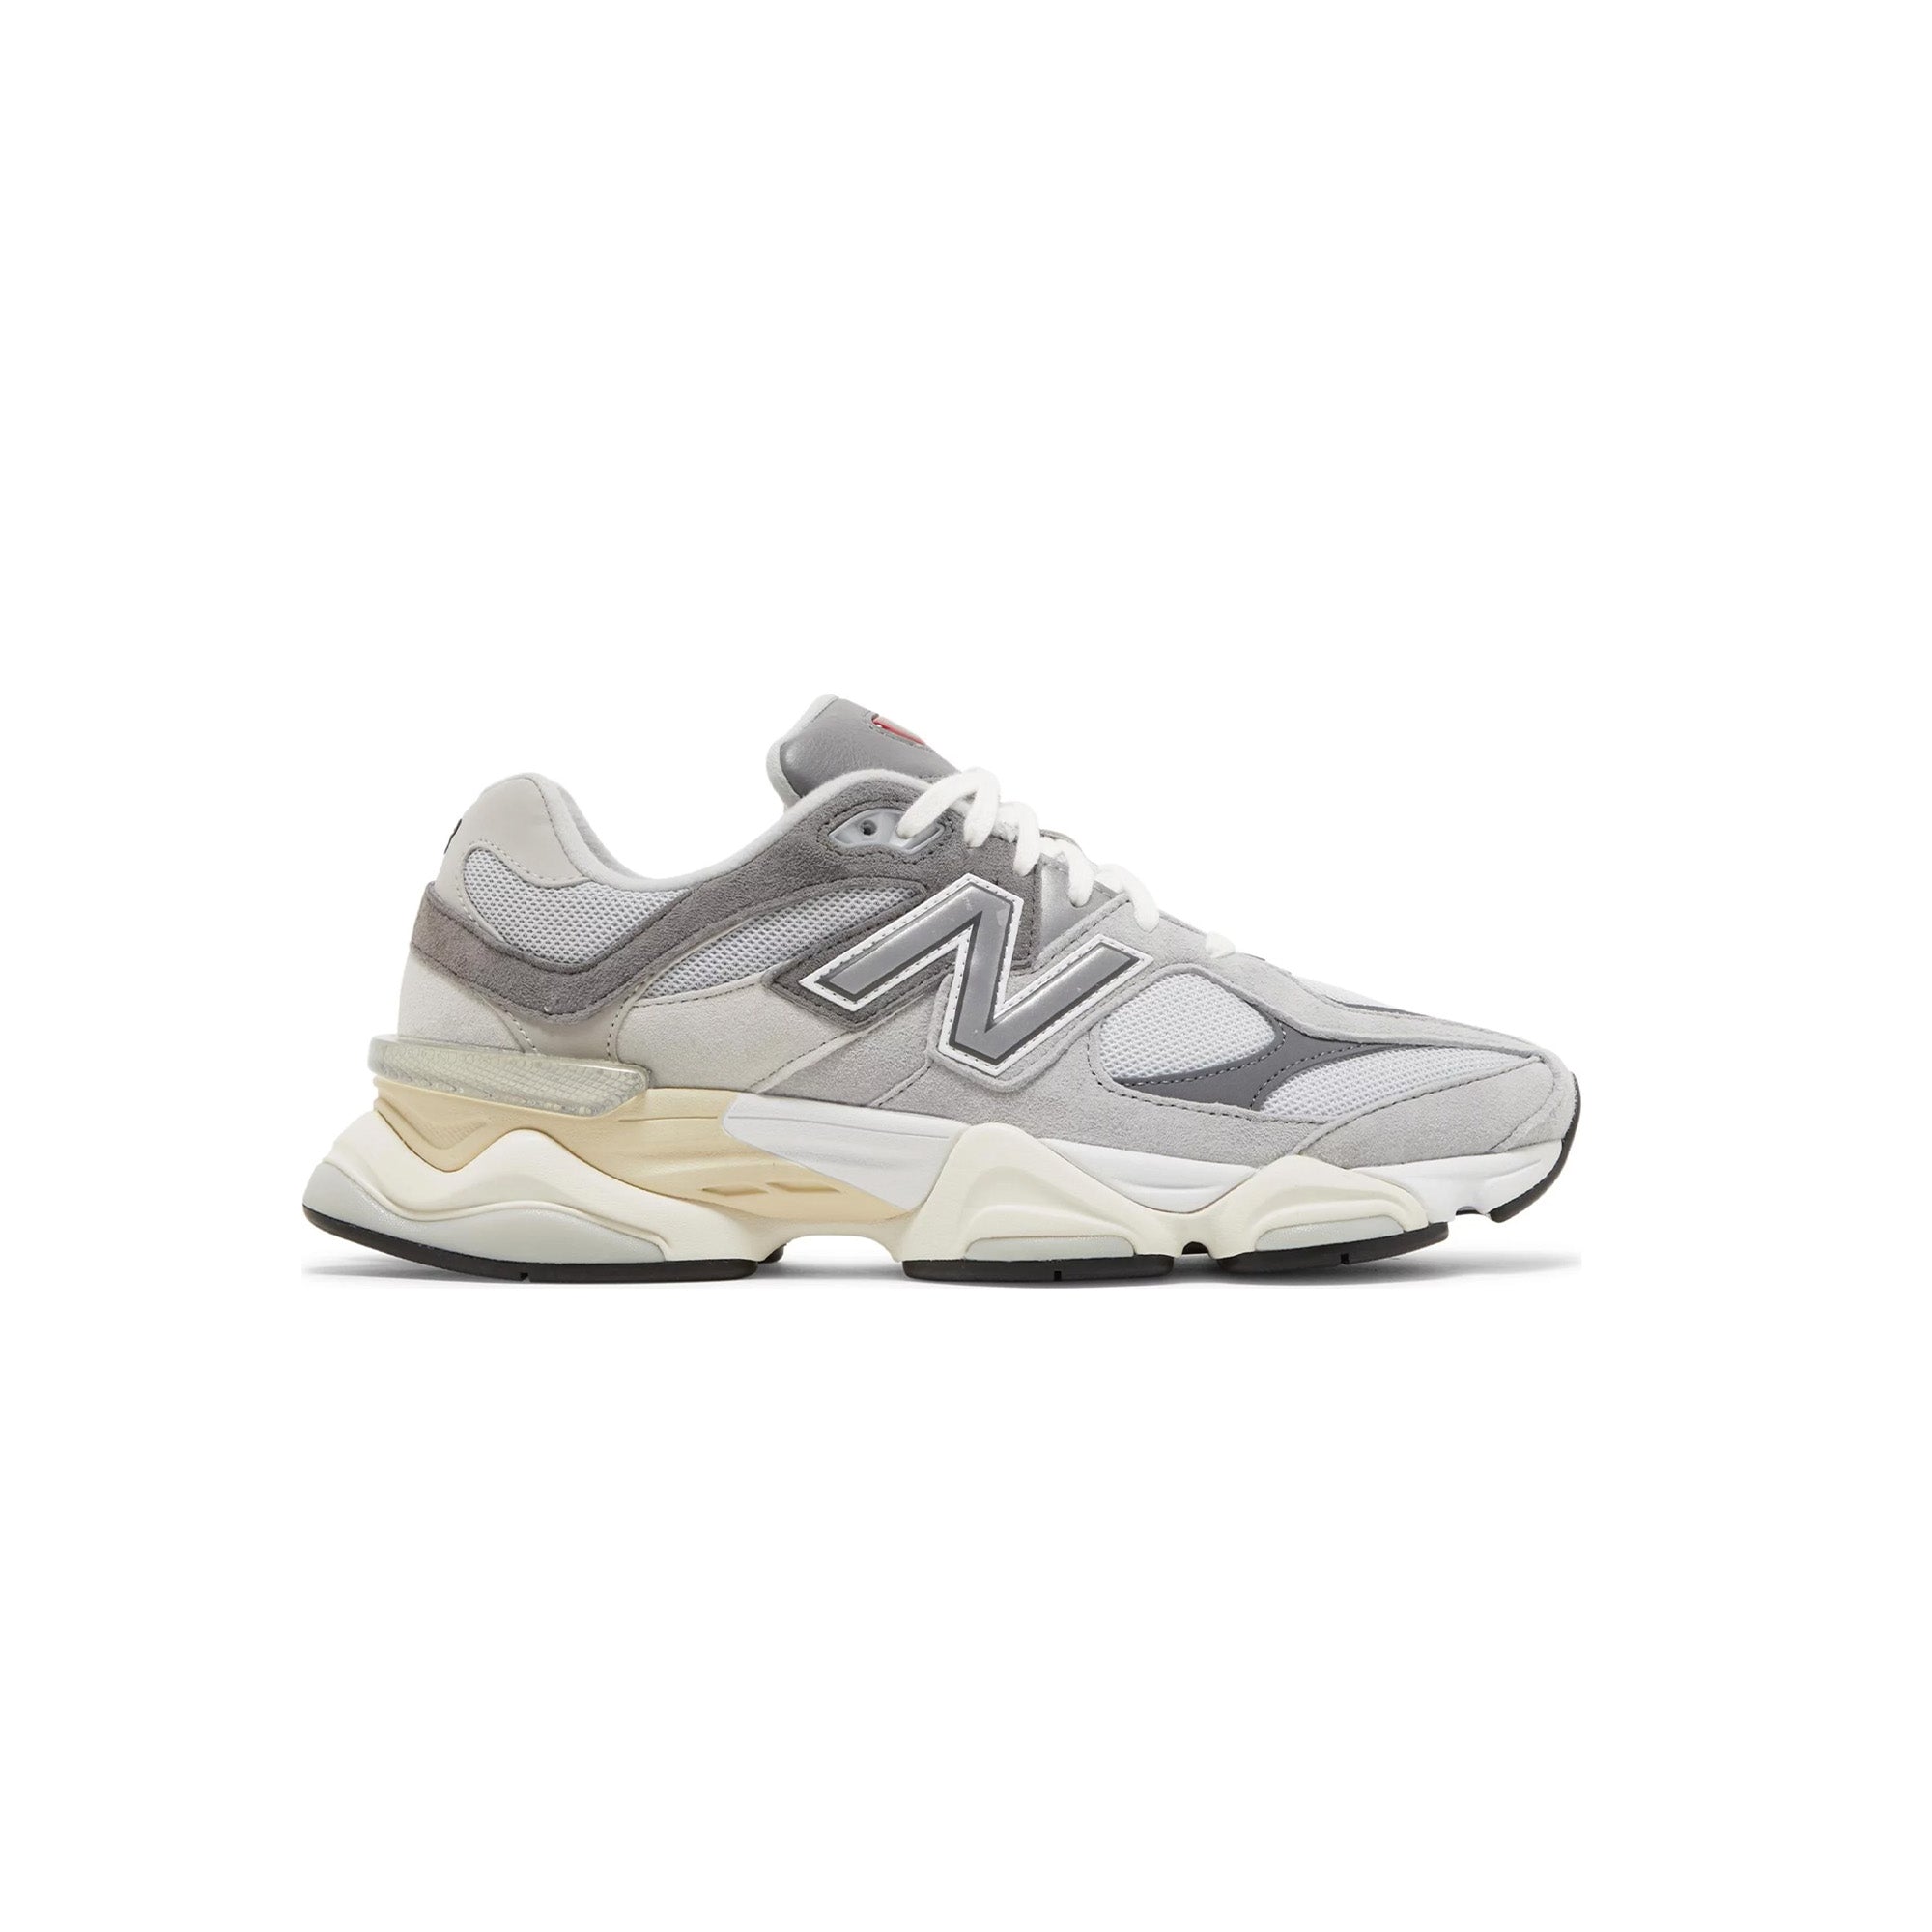 New Balance 9060 Rain cloud with castlerock and white